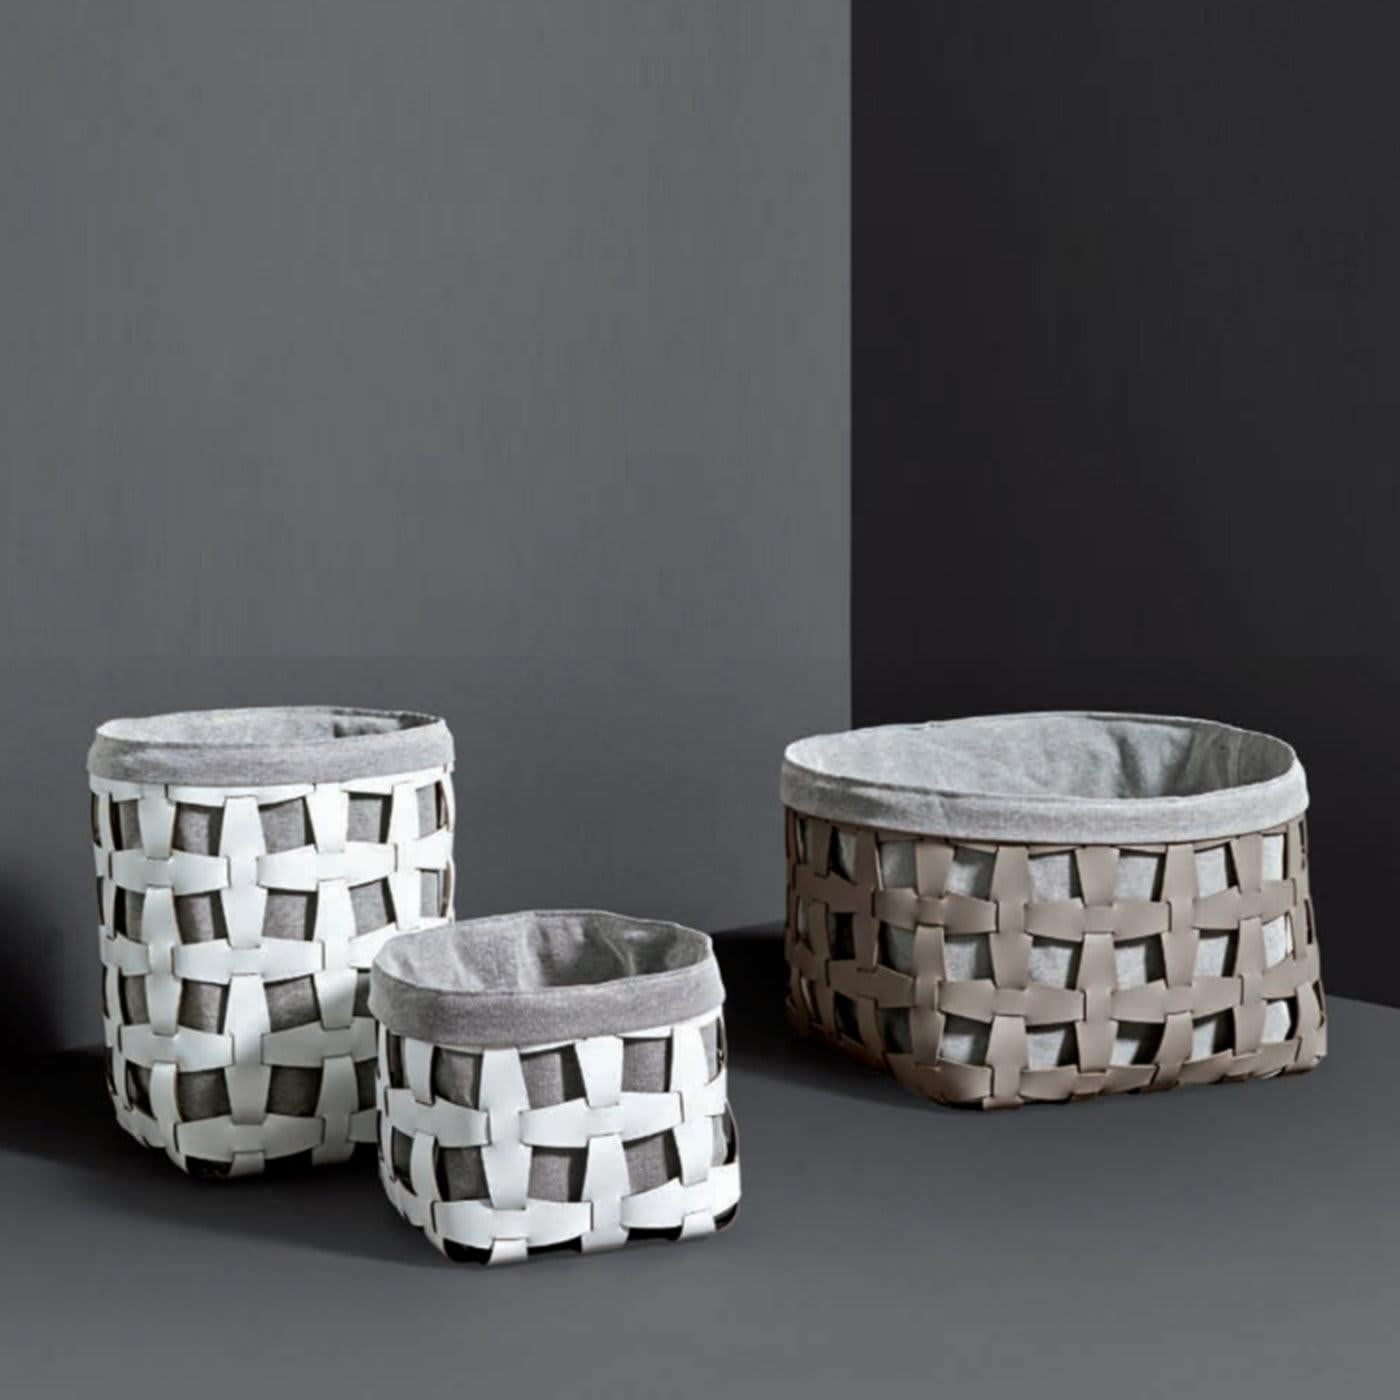 This elegant basket is part of the Hook collection, featuring containers of different sizes that can be used to store everyday objects both indoors and outdoors. Its shell is made of reconstituted leather in a shade of beige (available in other hues